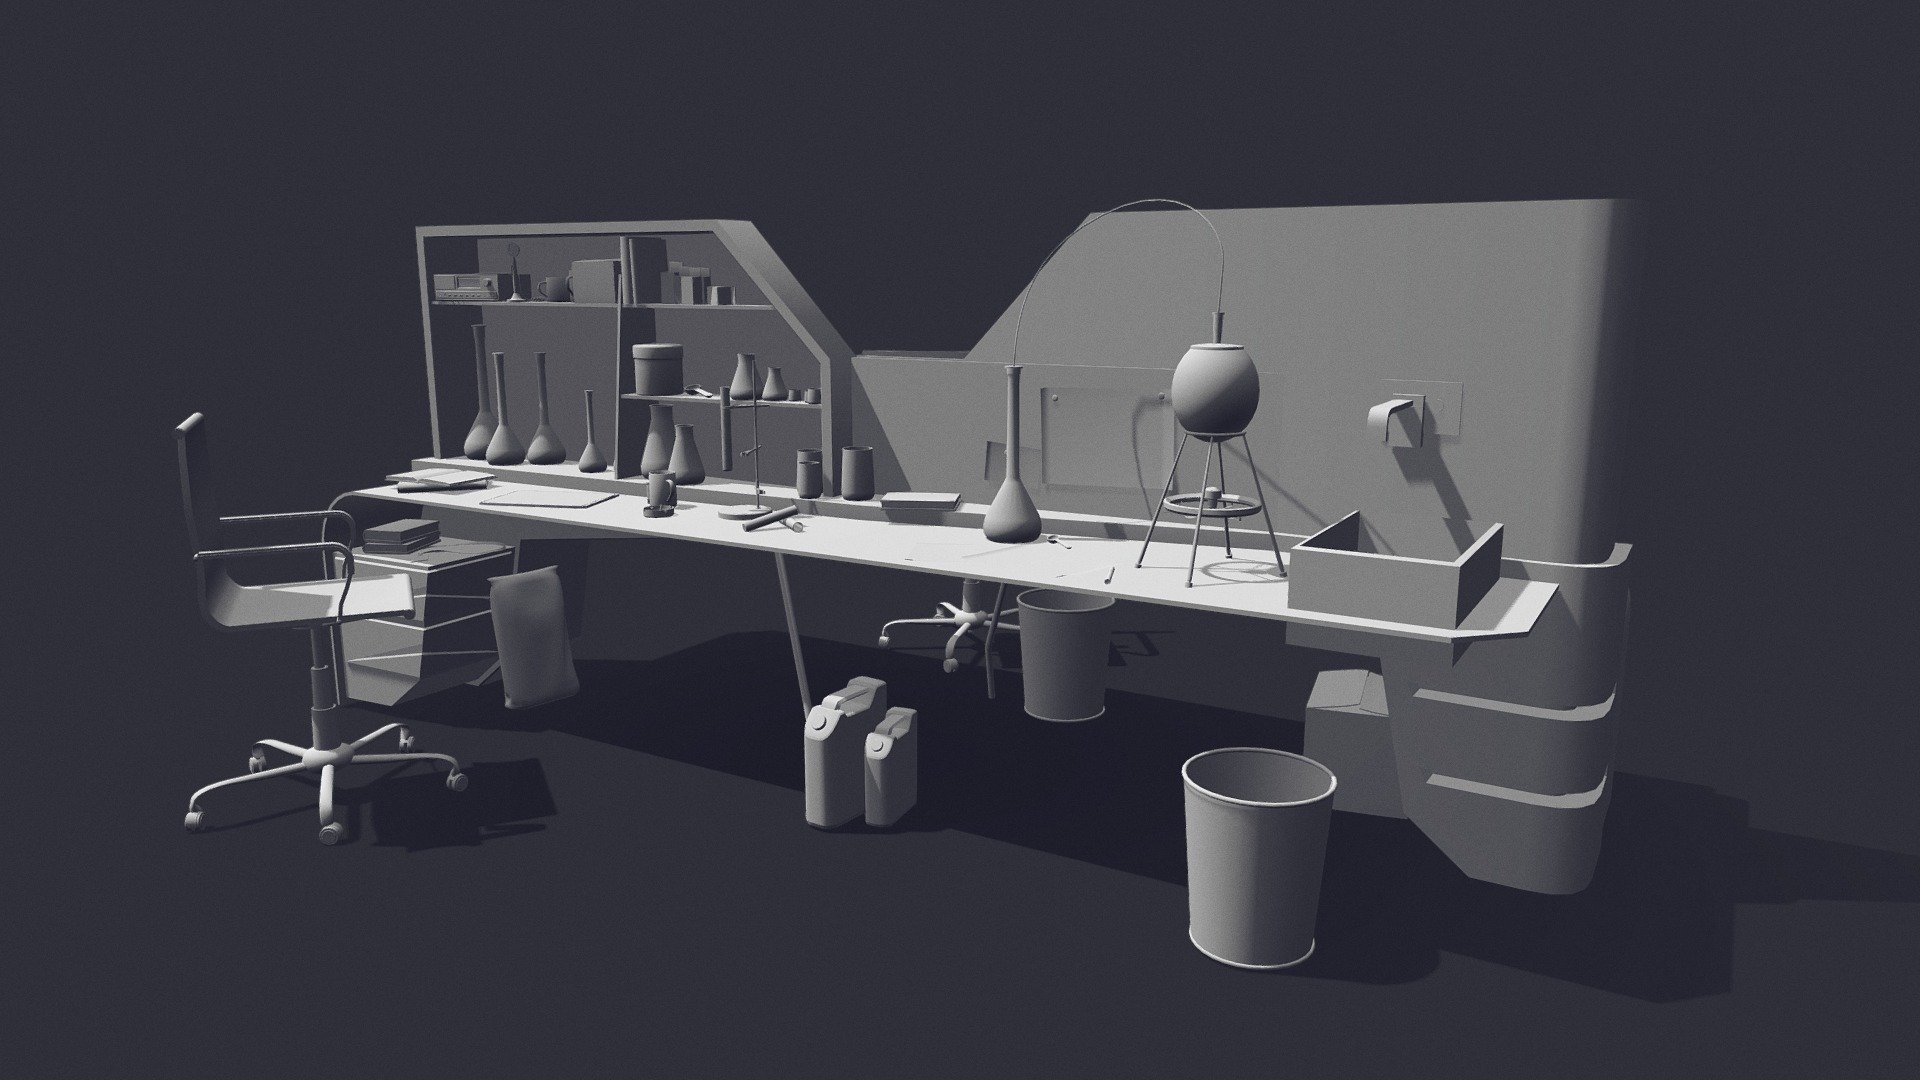 I've made all of the assets as part of a bigger project. I'm still working on it so I don't have enough time to add specific materials in here, but I'm uploading the little scene I've created with use of them. I'll probably come back to this and edit the materials later on for my own portfolio 3d model